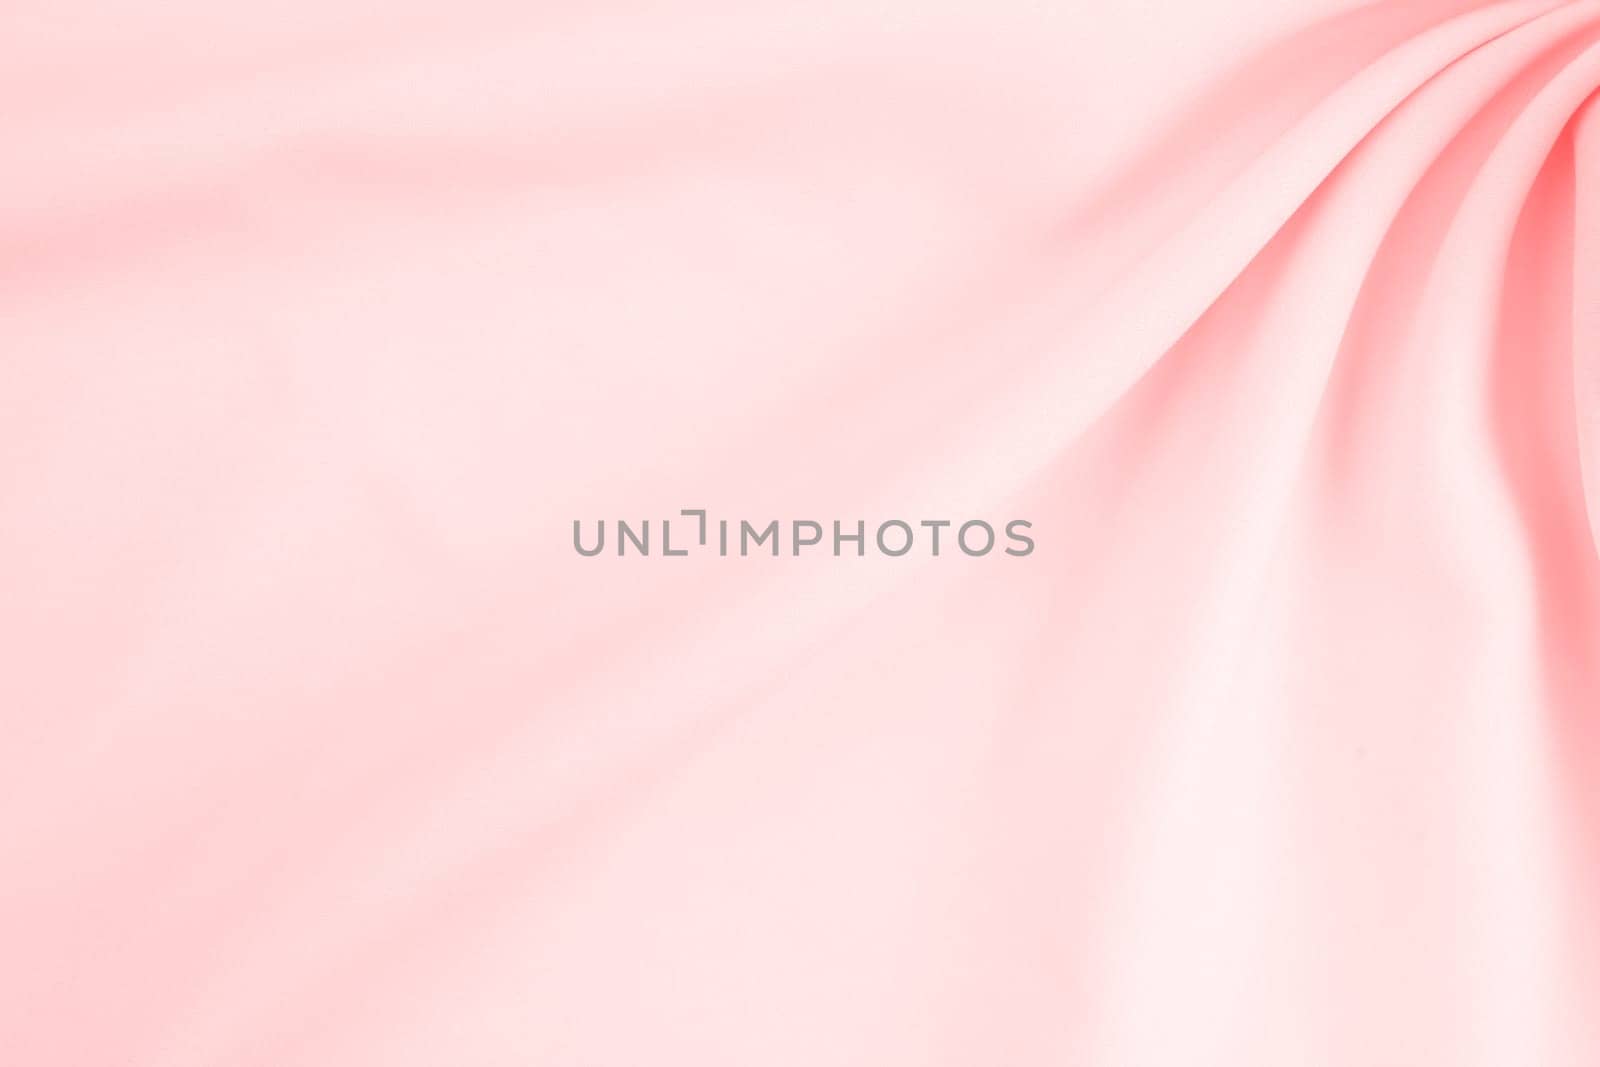 Pink silk background with blank space.